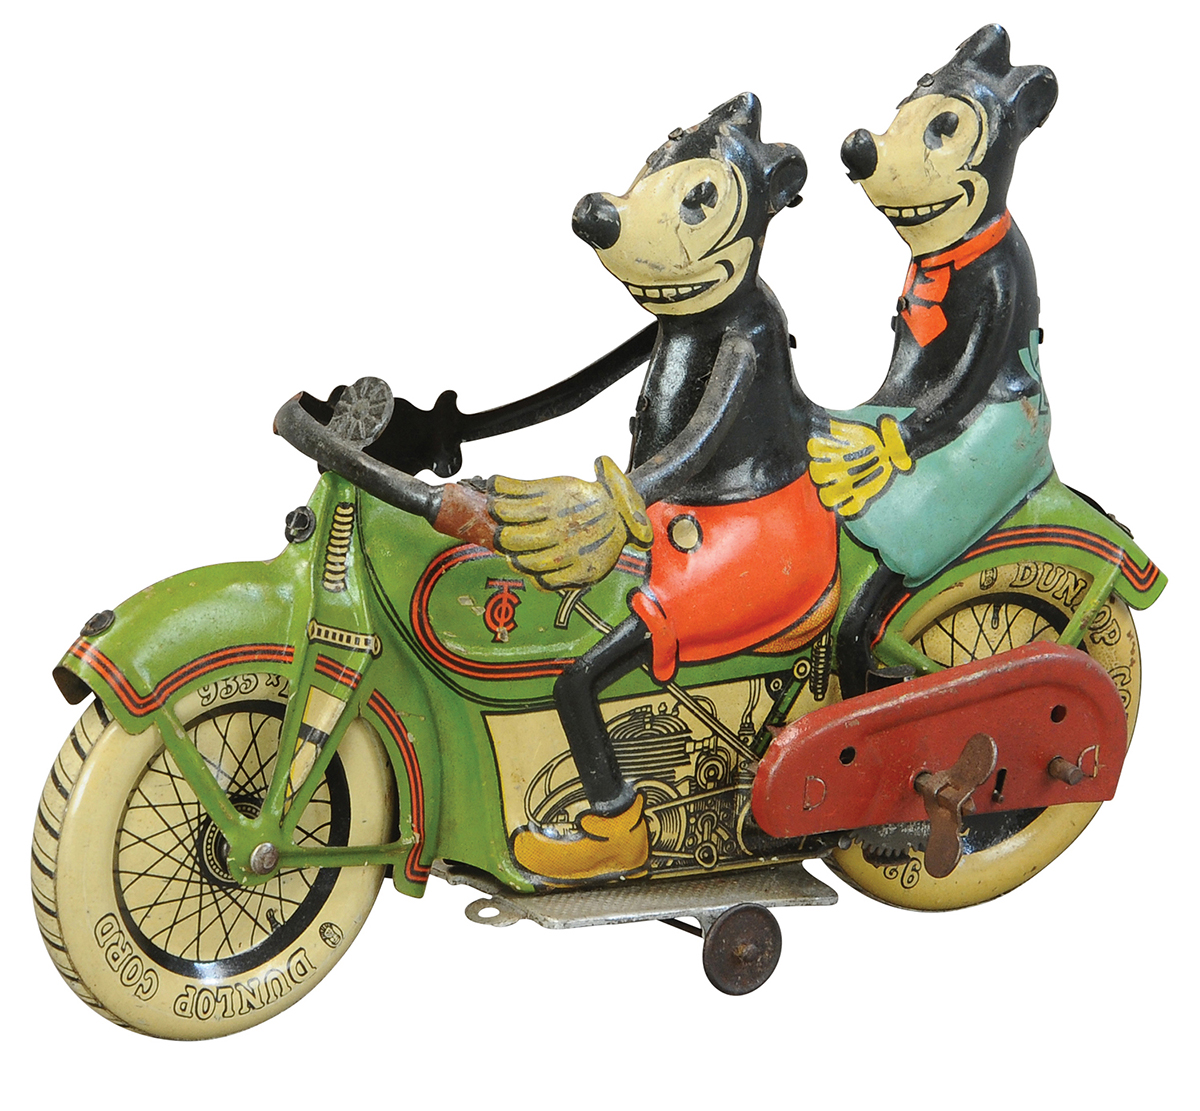 Mickey & Minnie Mouse motorcycle sells for a staggering $222,000 at Bertoia’s $2.1M sale of Monique Knowlton antique toy collection